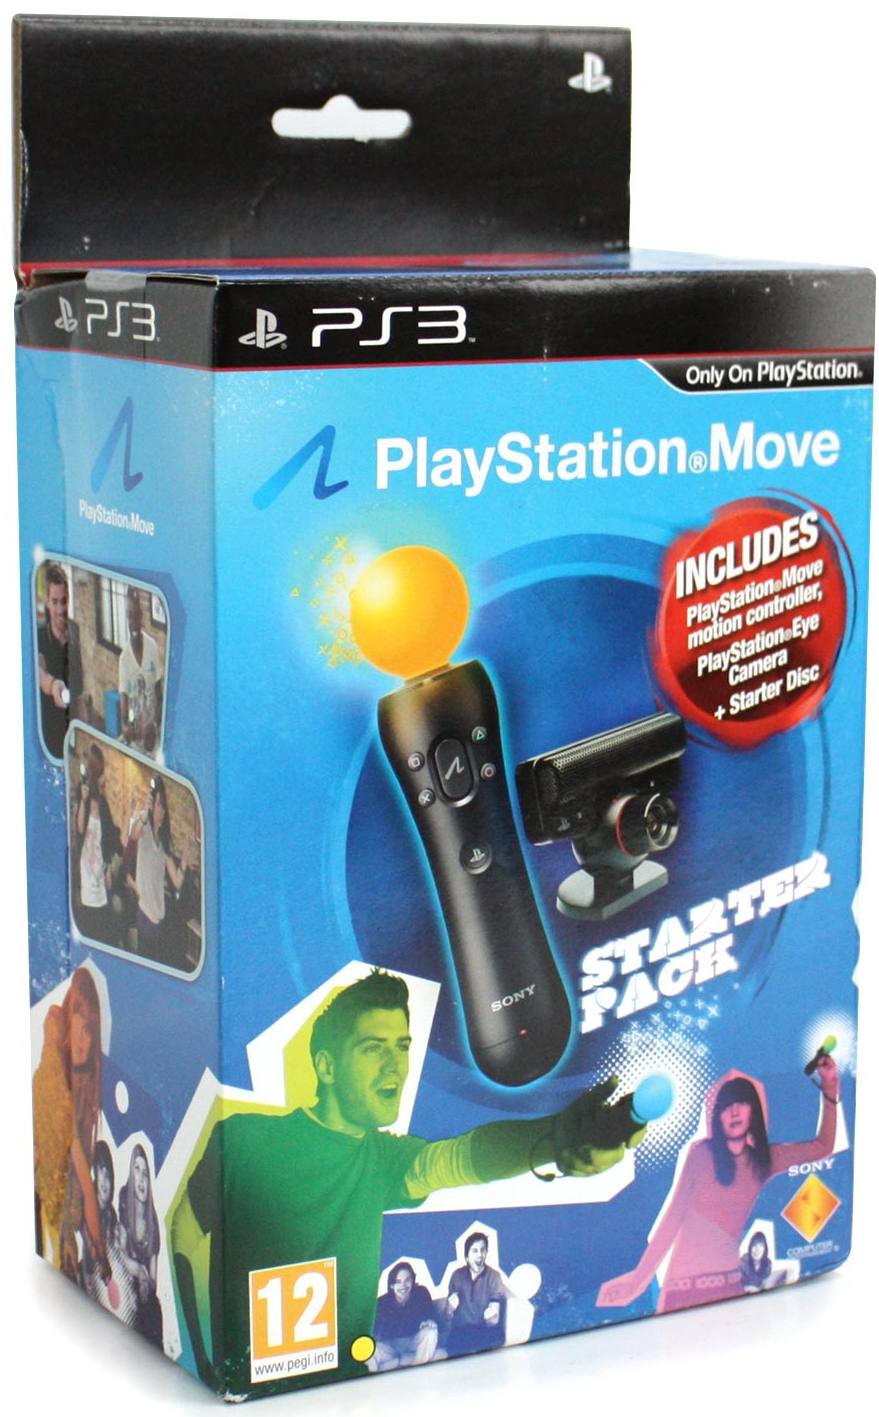 Seminary bande Opdater PlayStation Move Starter Pack (Motion Controller Camera with Starter Disc)  for PlayStation 3